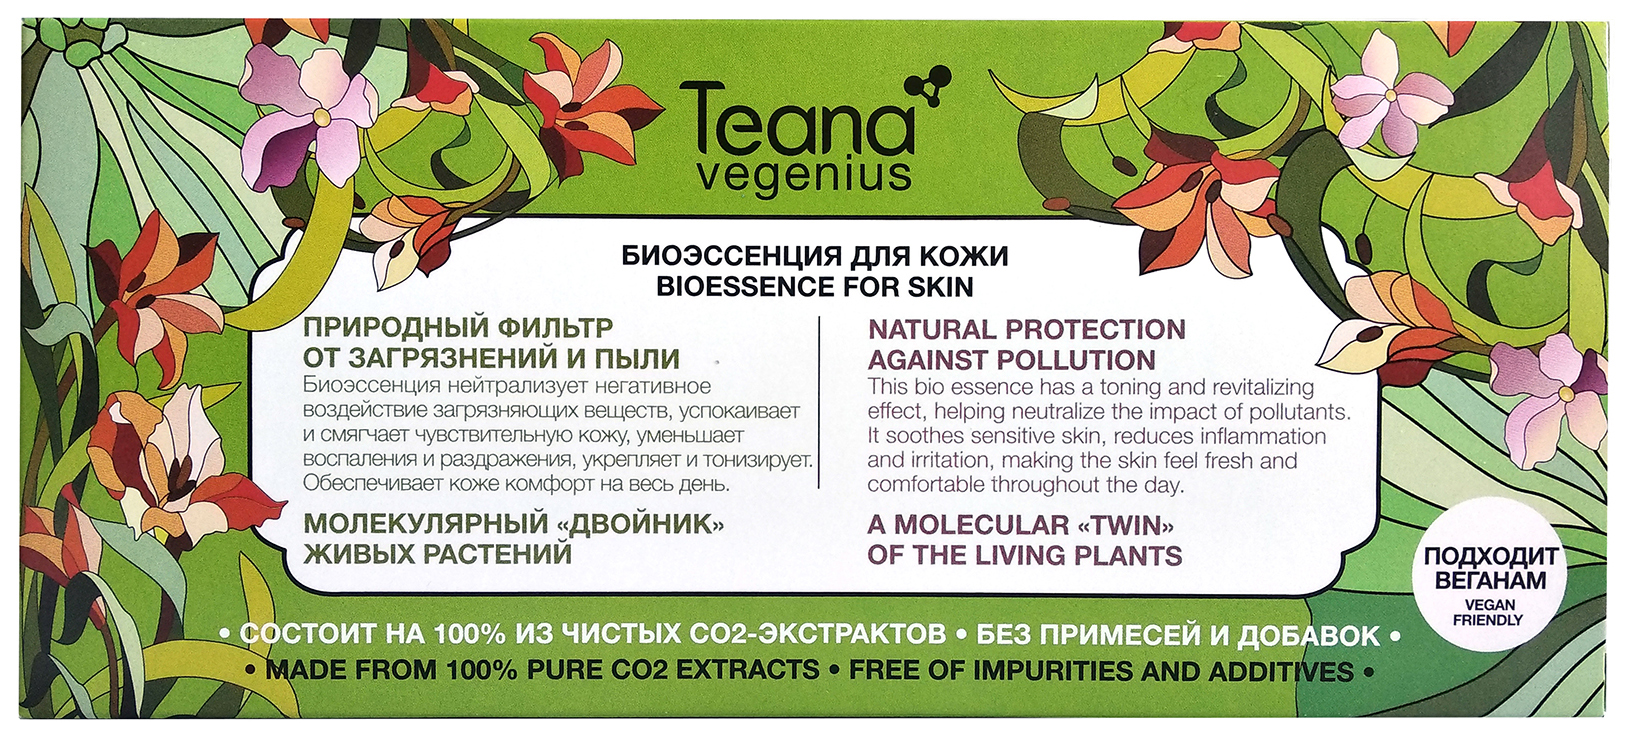 фото Teana vegenius bioessence for skin natural protection against pollution